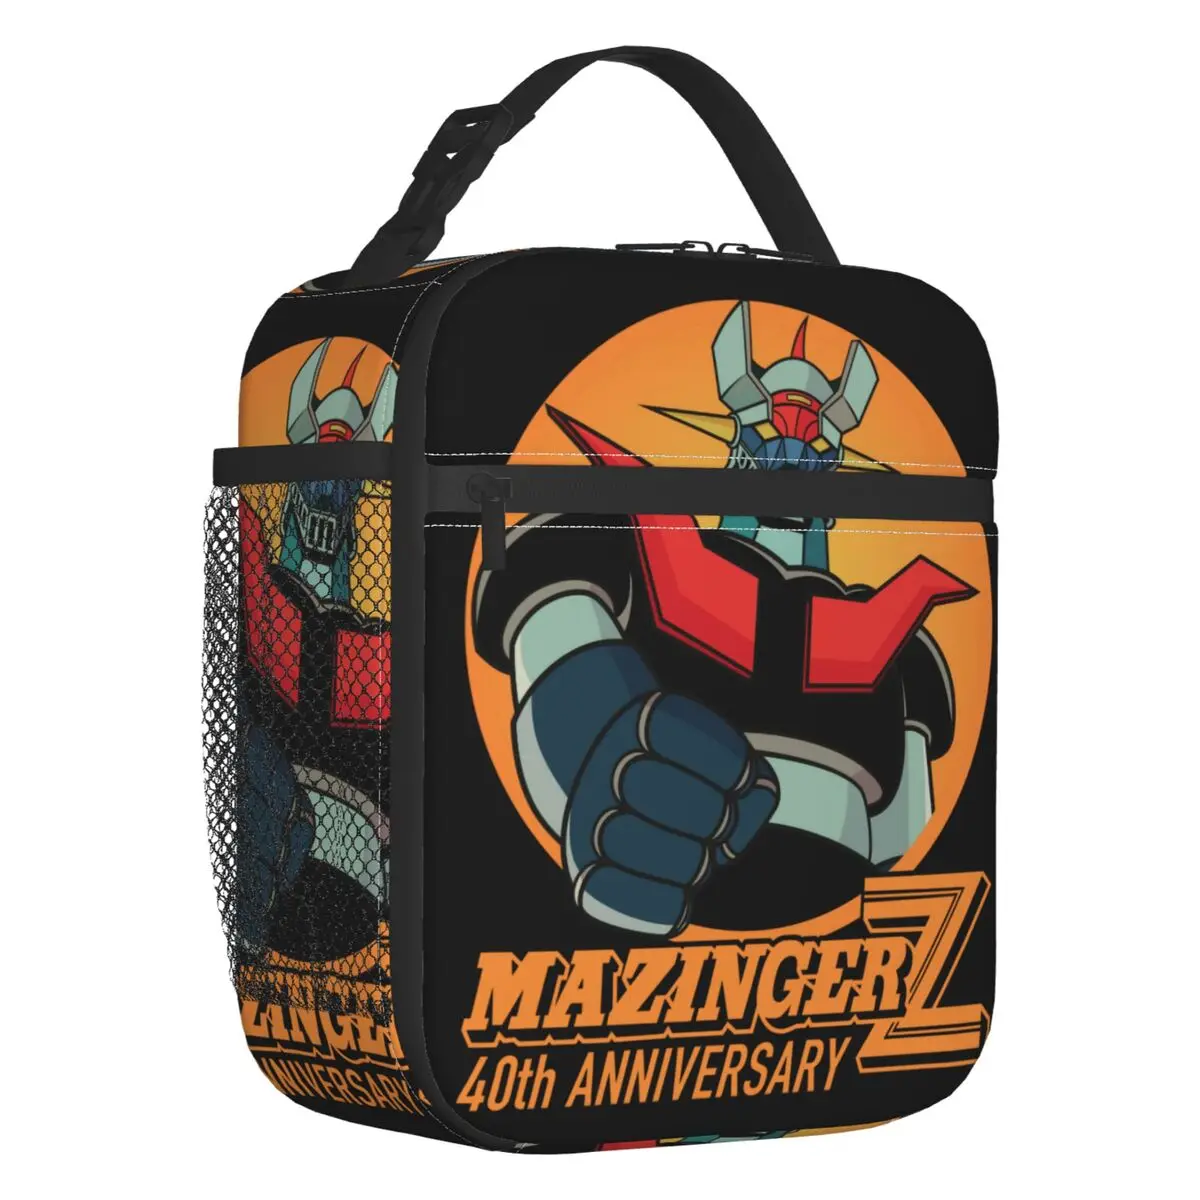 

Goldorak Mazinger Z Robot Lunch Boxes Women Waterproof Anime TV Shows Goldrake Thermal Cooler Food Insulated Lunch Bag School